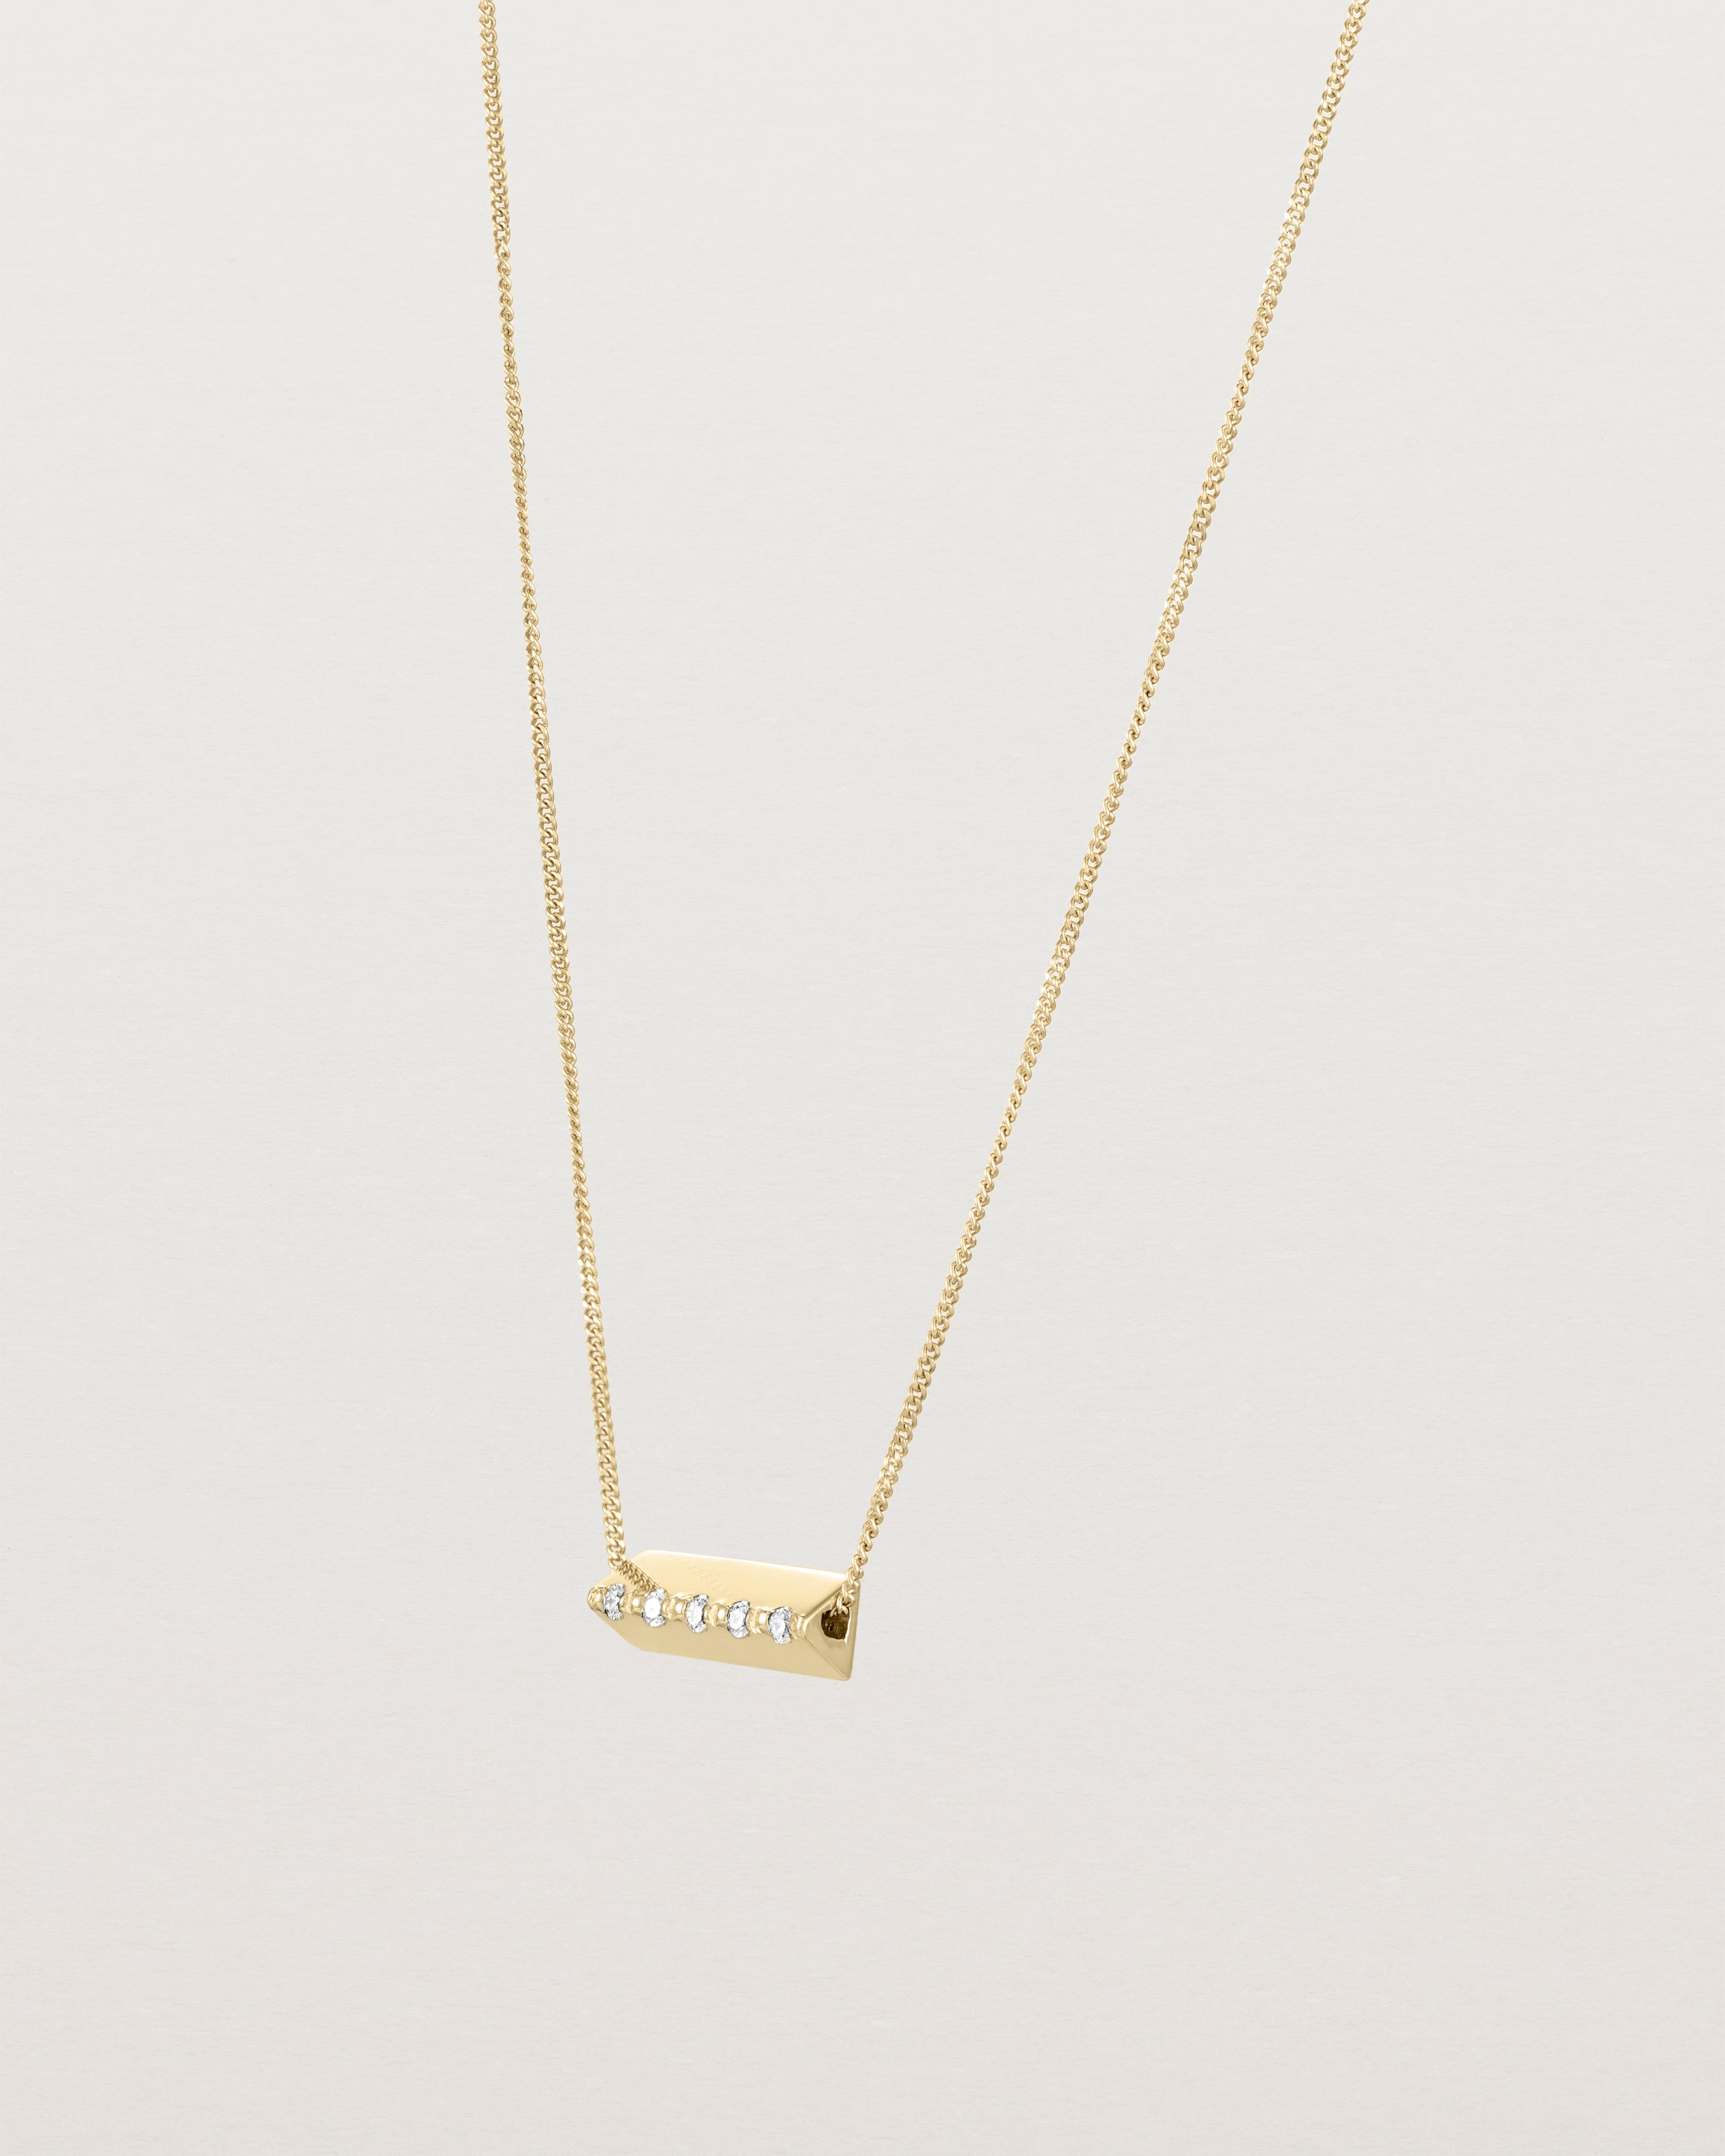 Angled view of the Cascade Knife Edge Necklace | Diamonds in yellow gold.